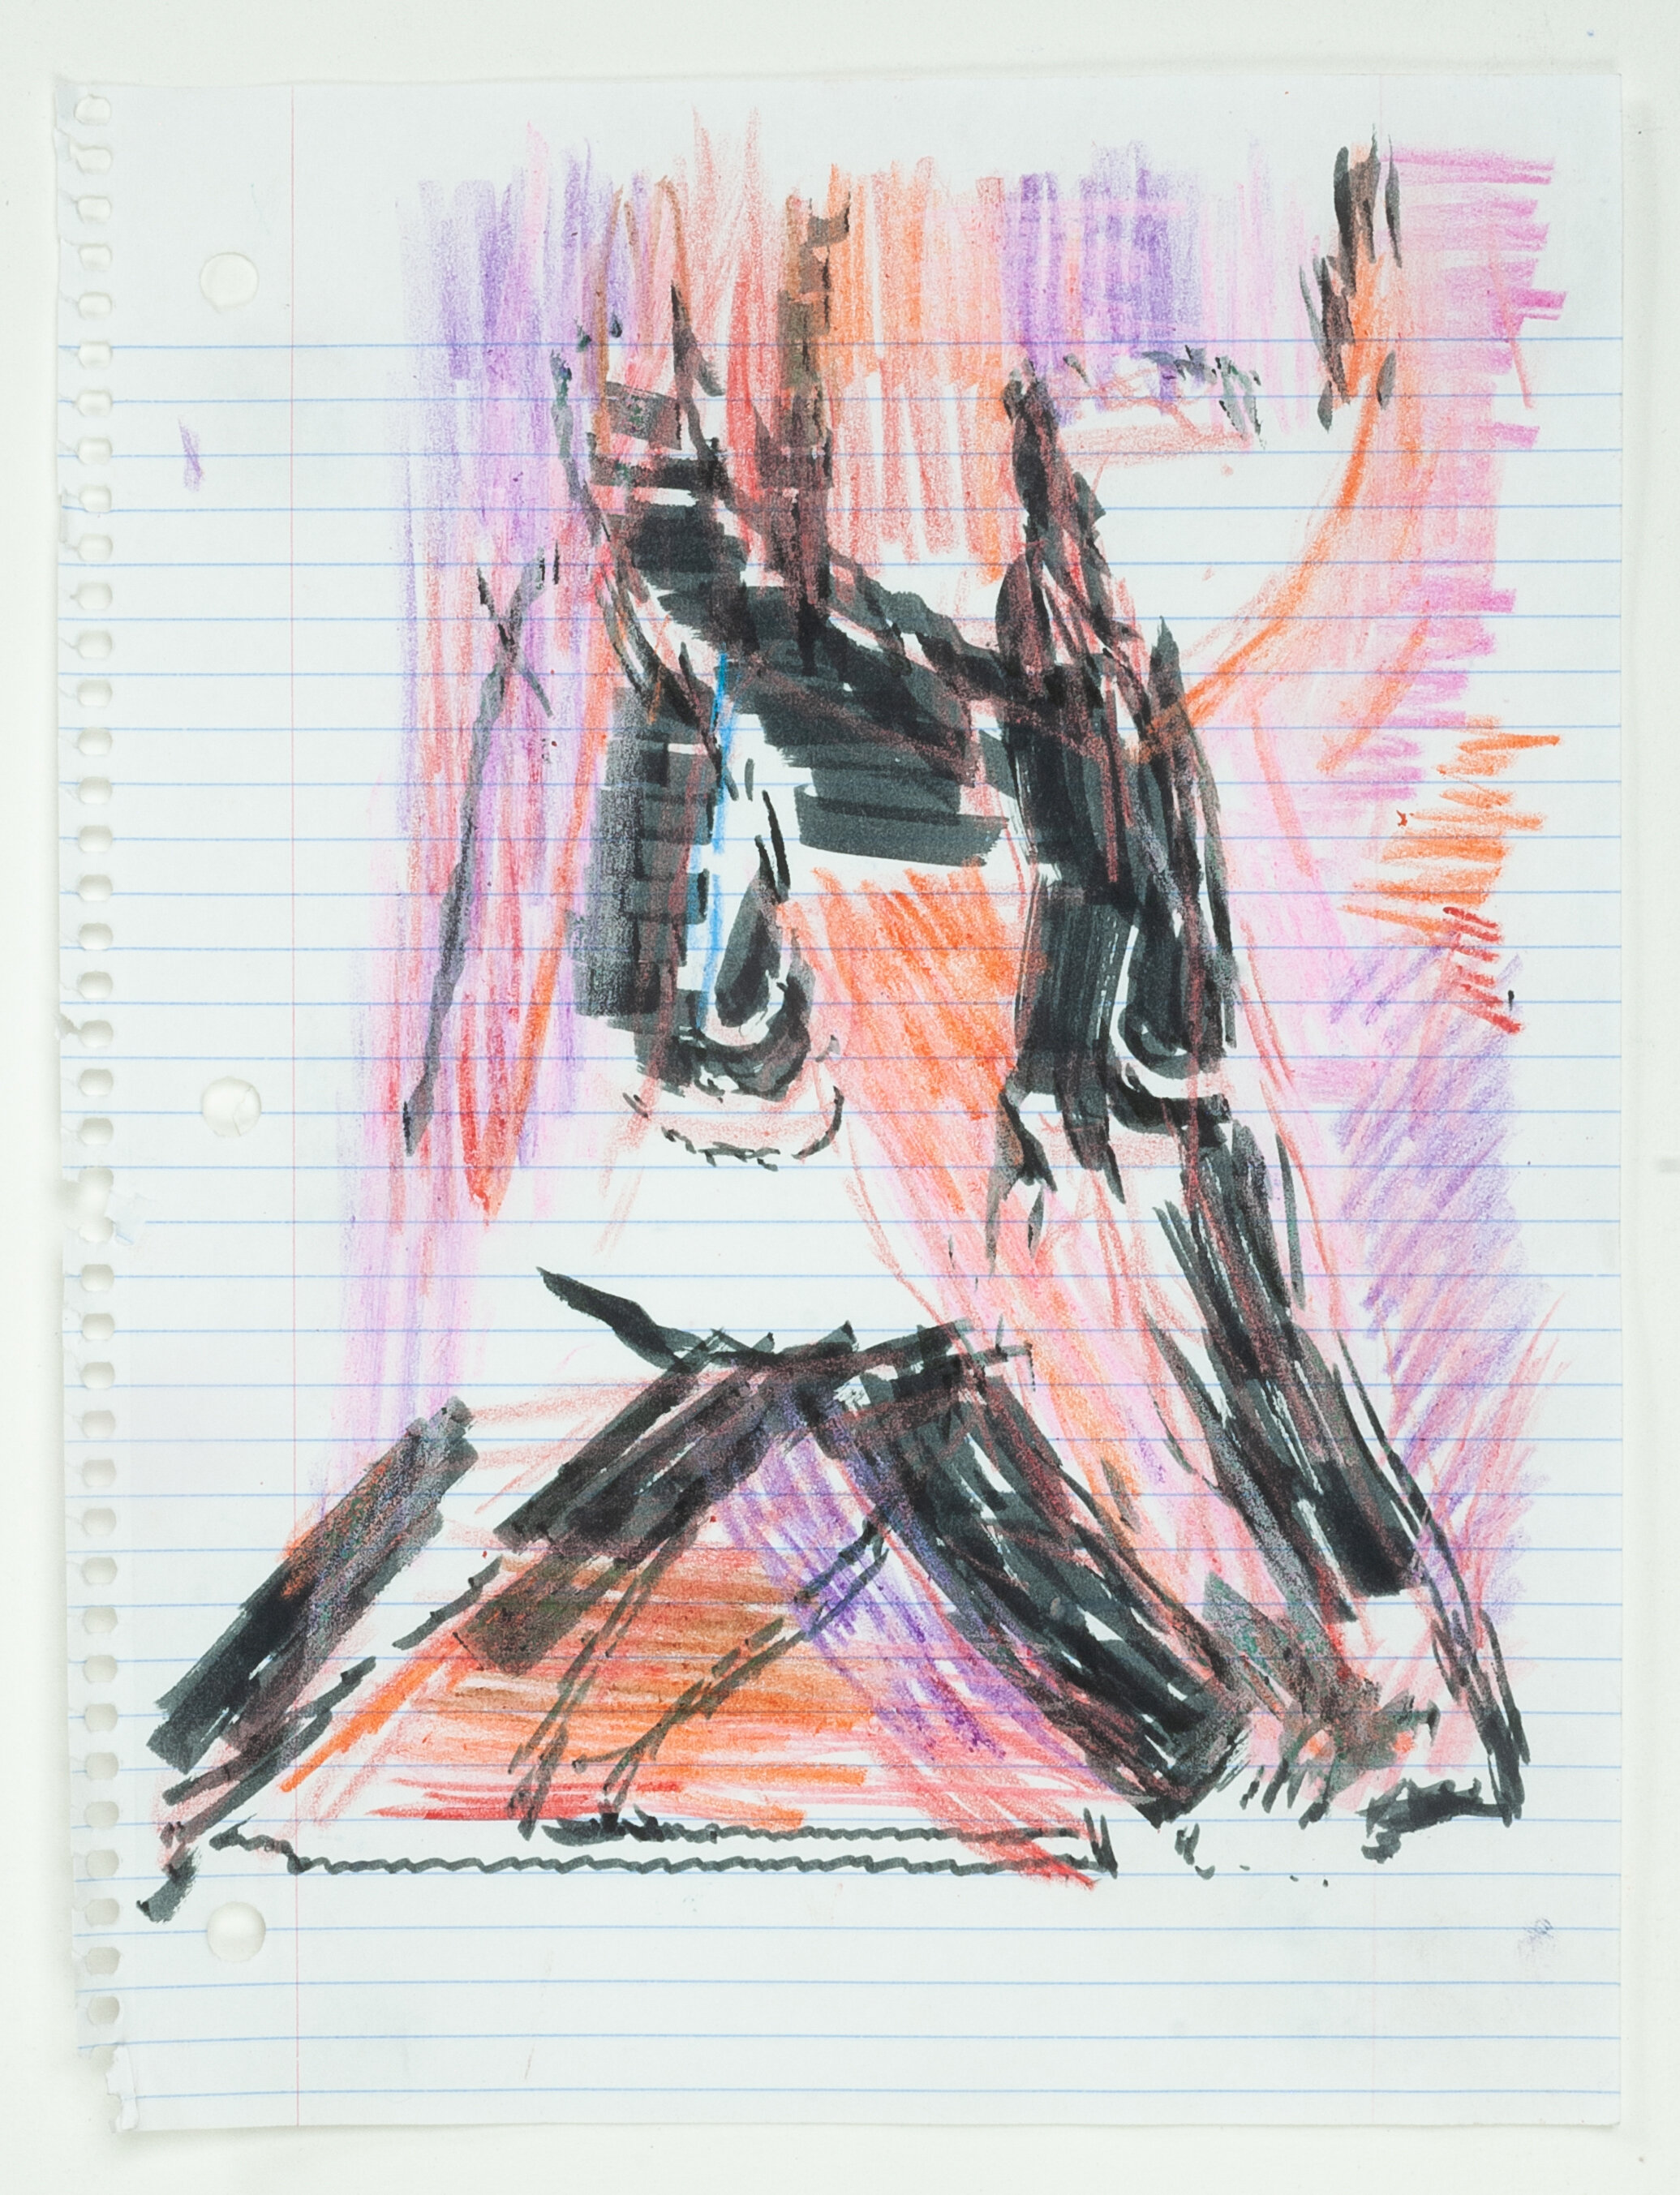   sm_wop2020_19 , 2020 crayon and ink on paper, 11 x 8.5 in. 